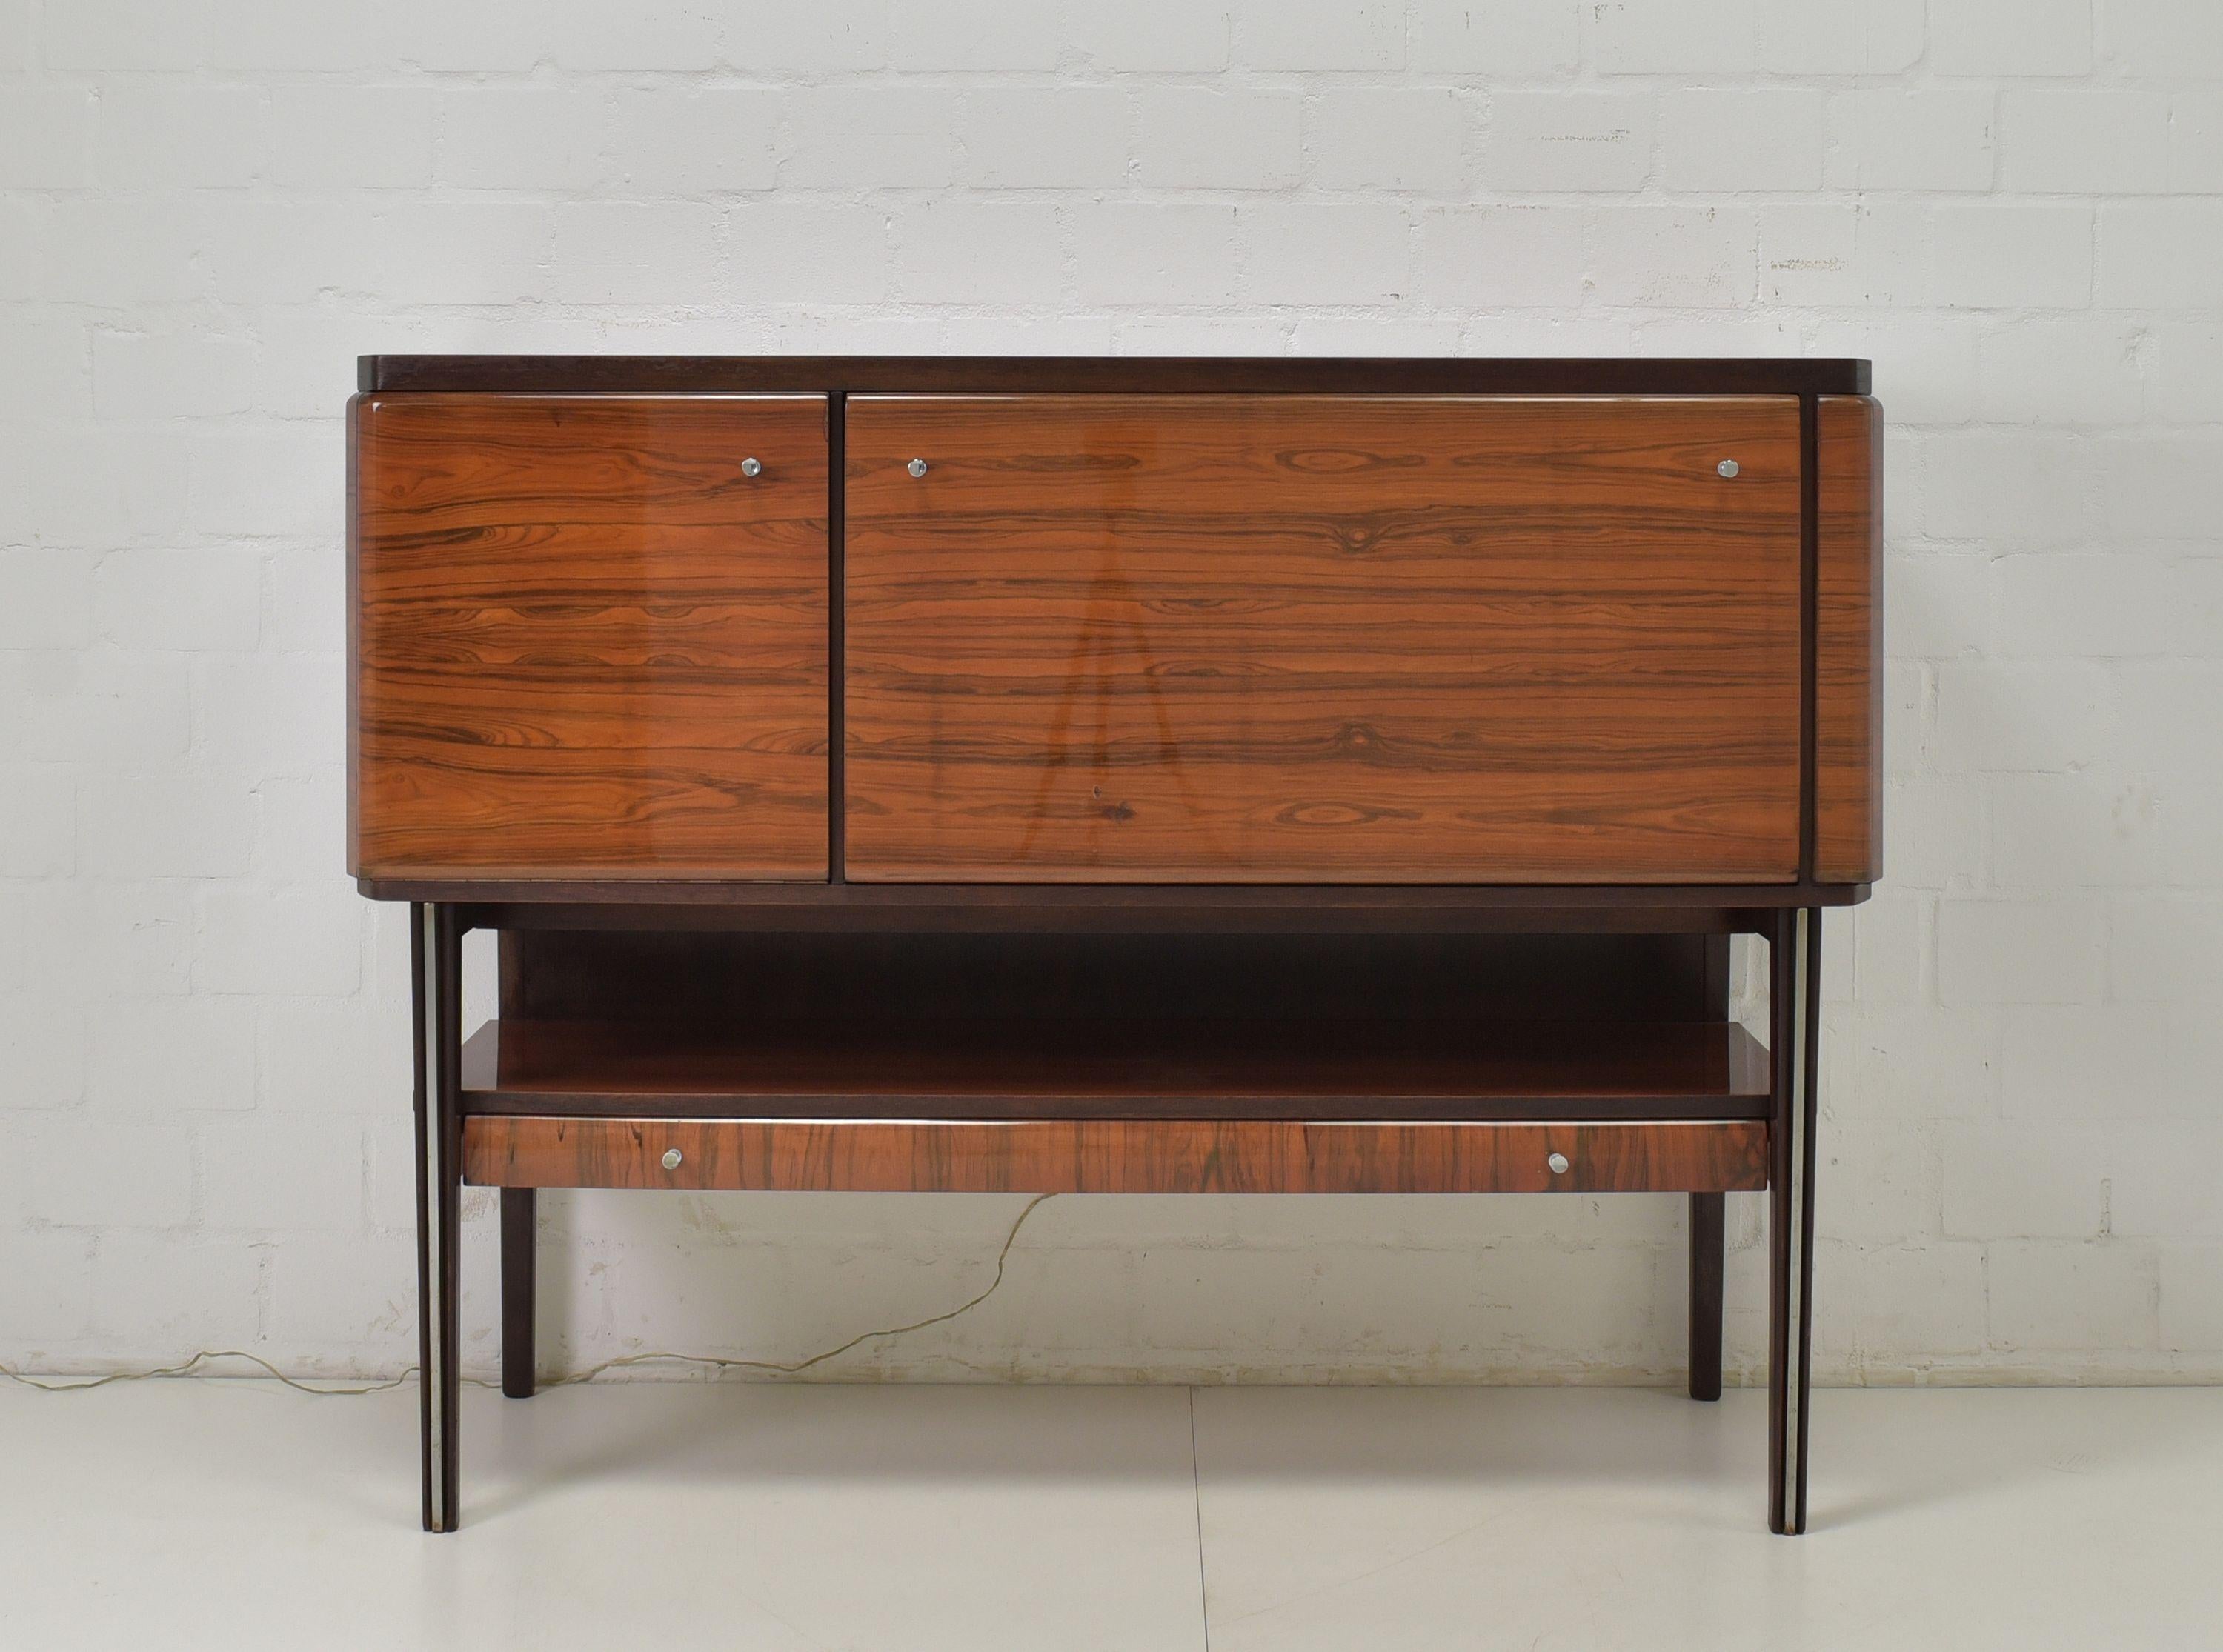 Bar cabinet highboard sideboard rosewood retro vintage around 1970 illuminated

Features:
Two-piece model
Upper part with two flaps, right side illuminated
High-legged base with an open compartment and a flat drawer
Chromed handles and chrome